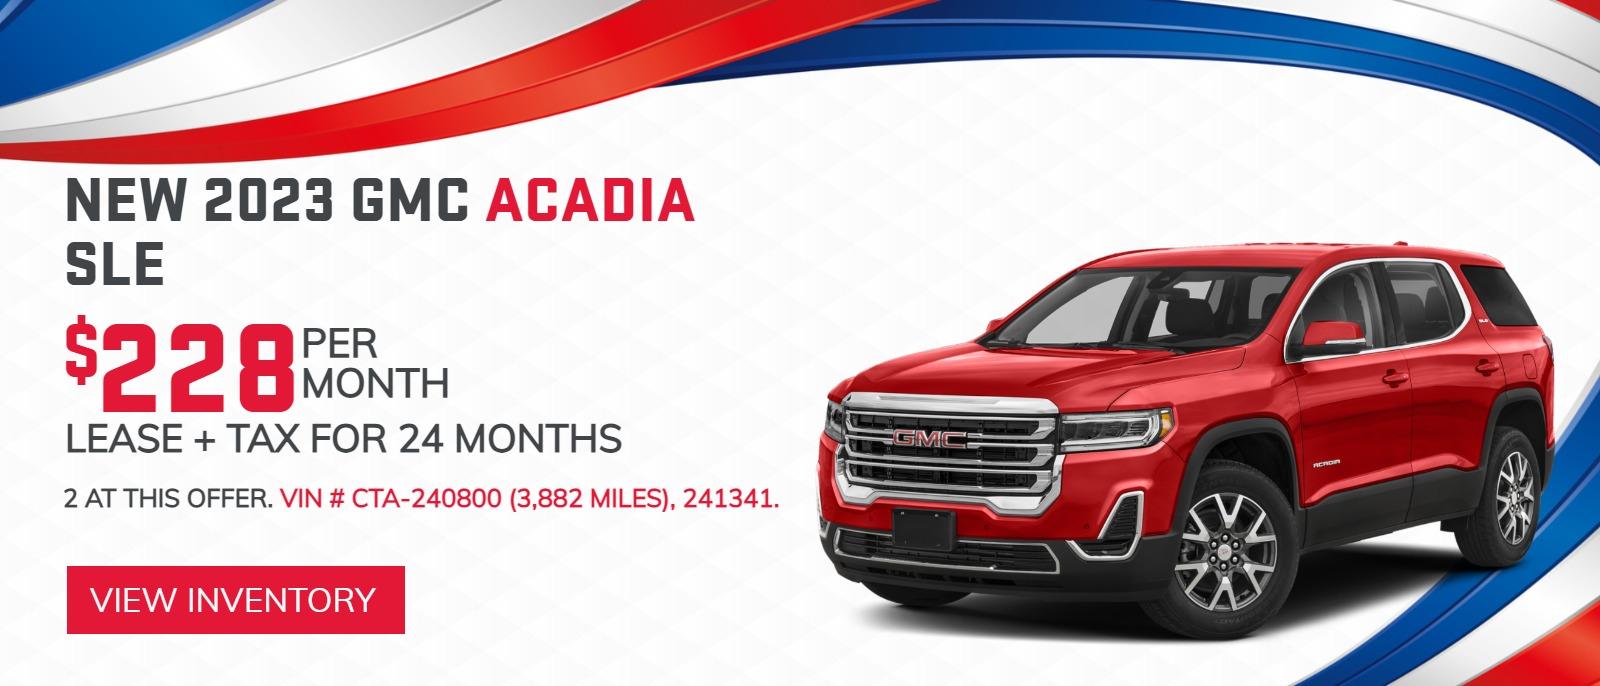 New 2023 GMC Acadia SLE

$228/mo.* Lease + Tax for 24 Months
2 at this offer. VIN # CTA-240800 (3,882 miles), 241341.